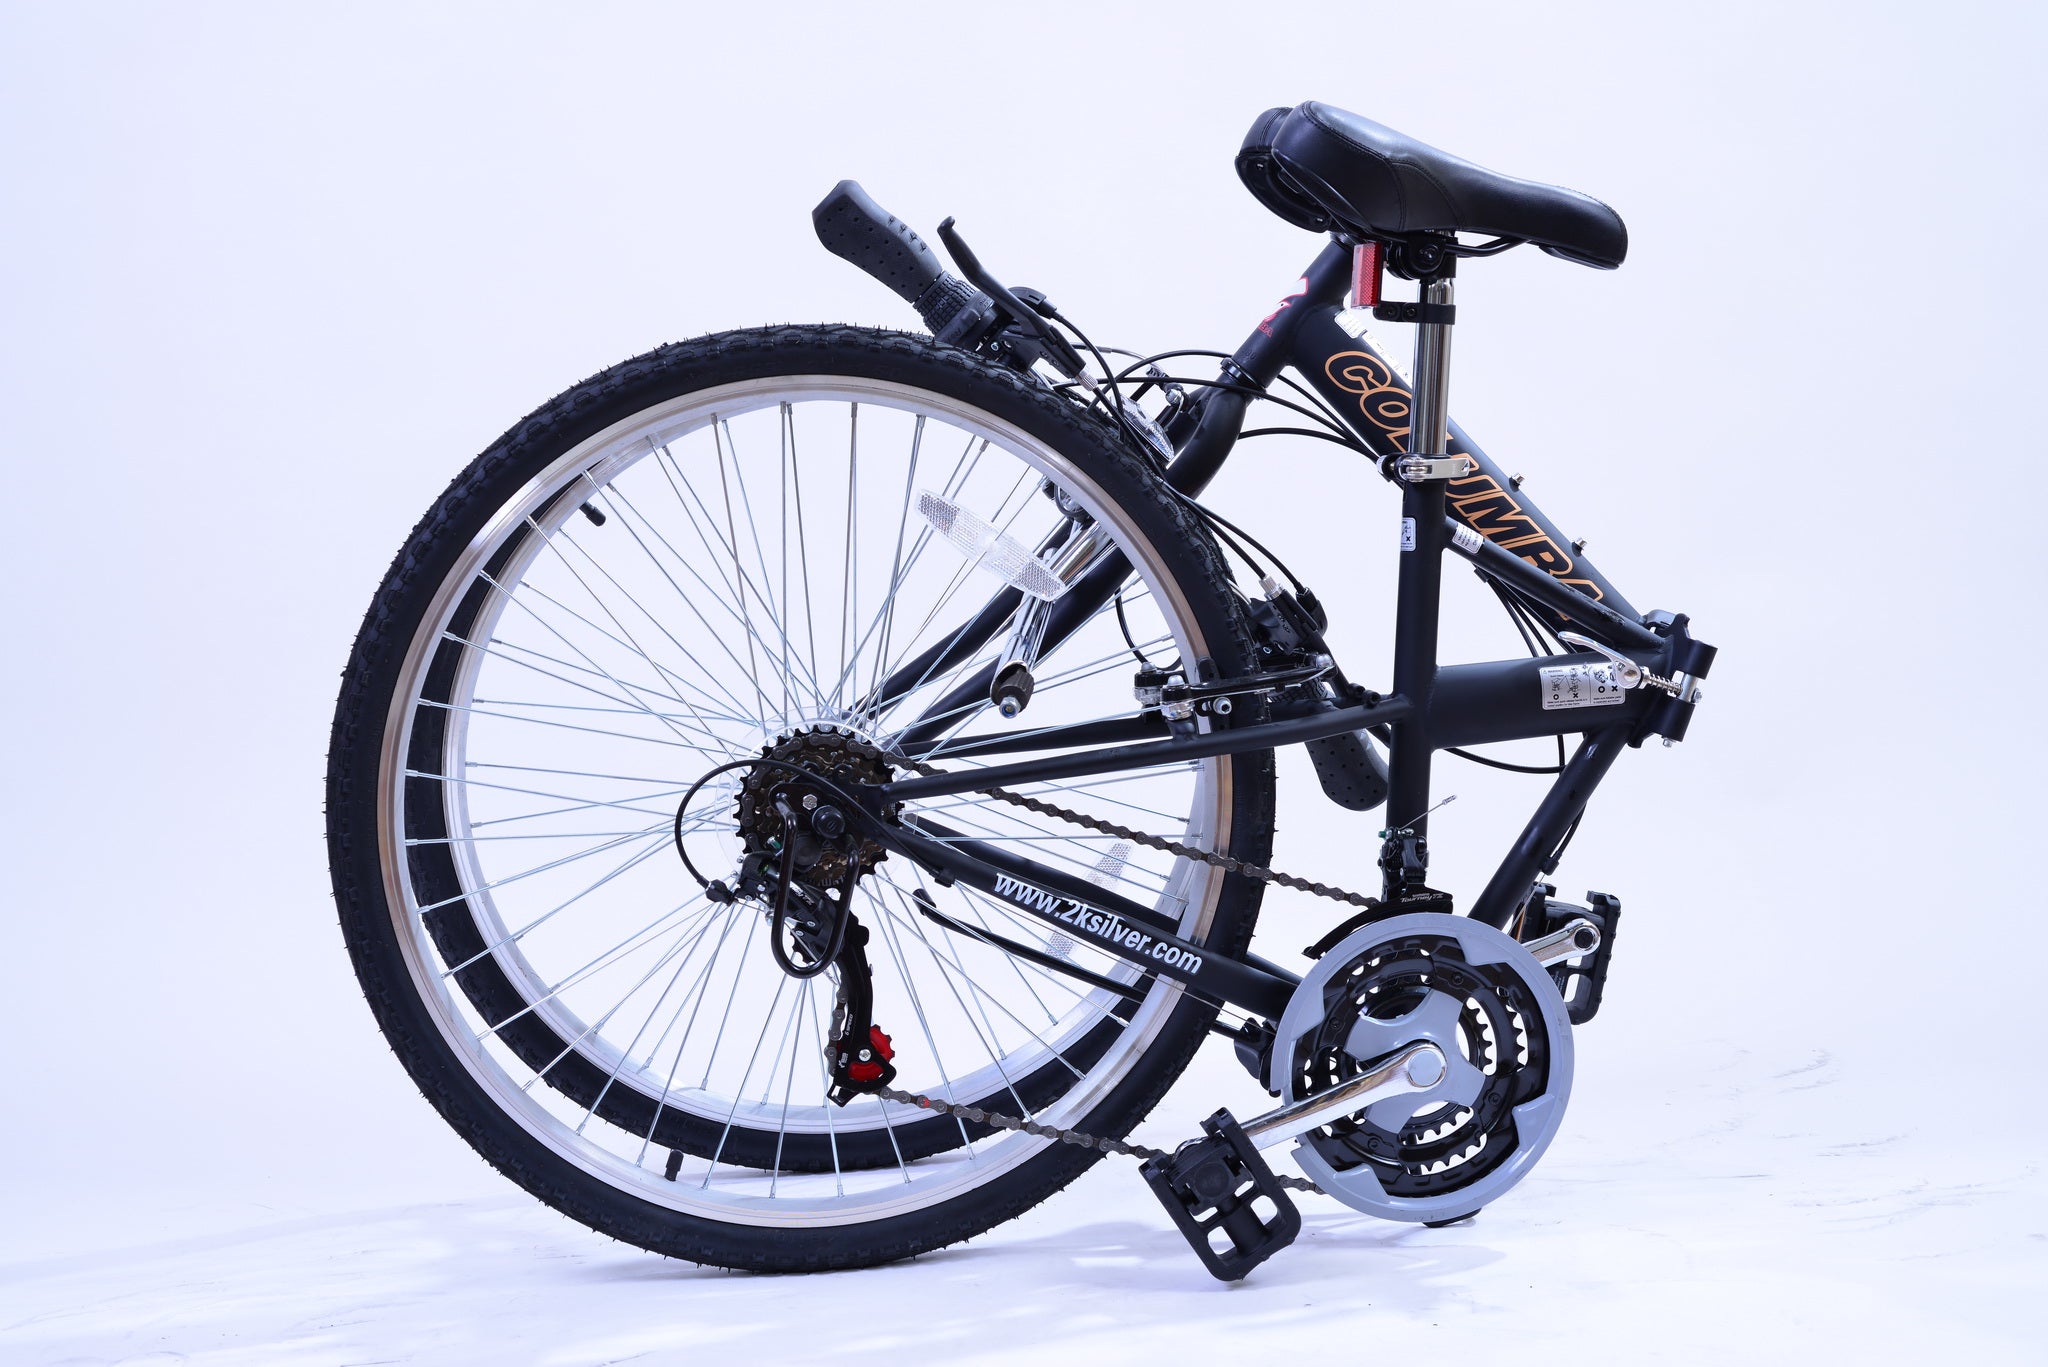 Black bicycle in a folded position sitting on the ground.